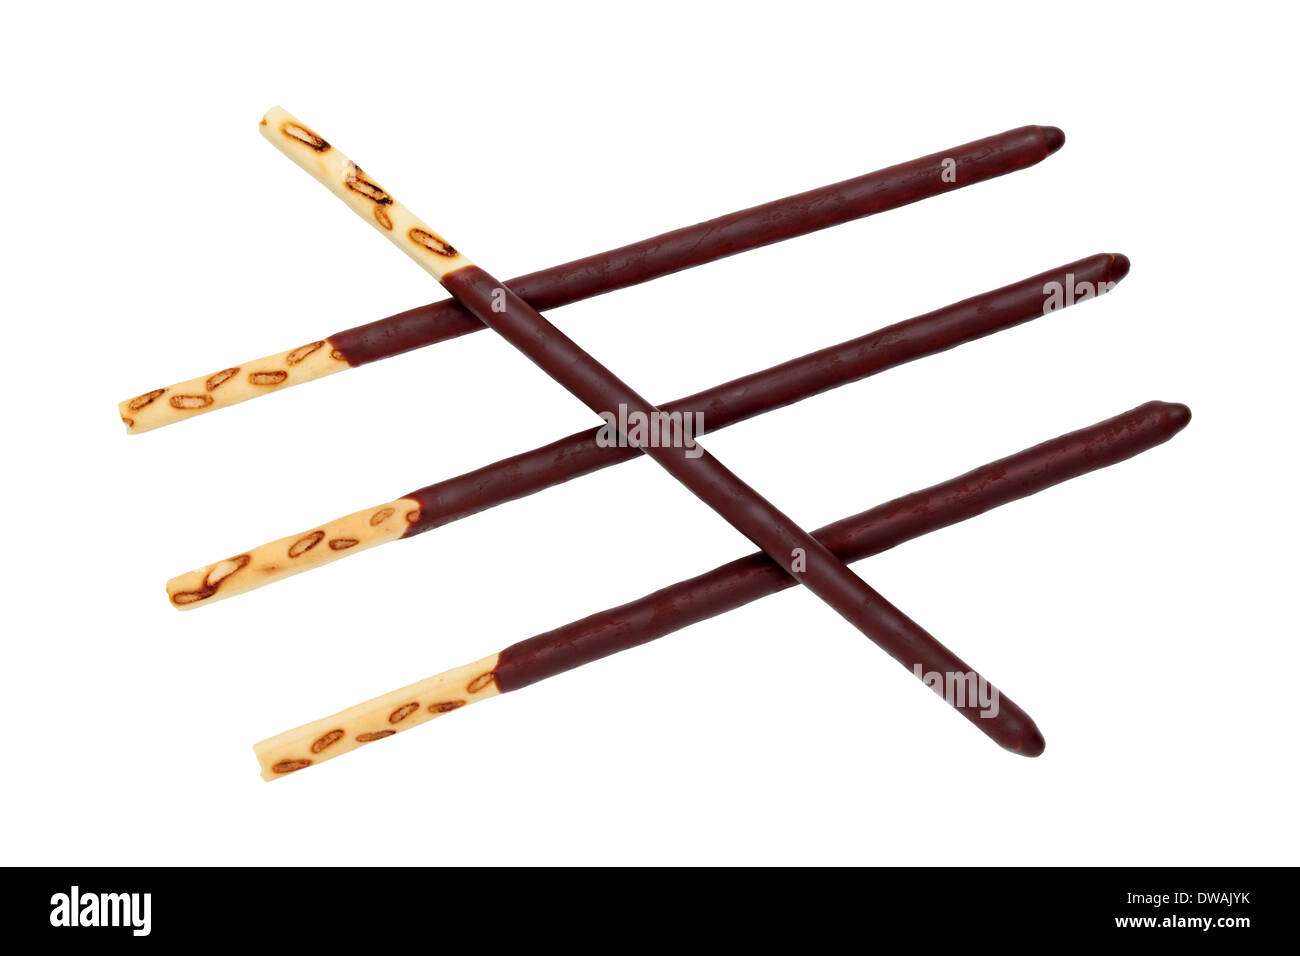 chocolate biscuit stick Stock Photo